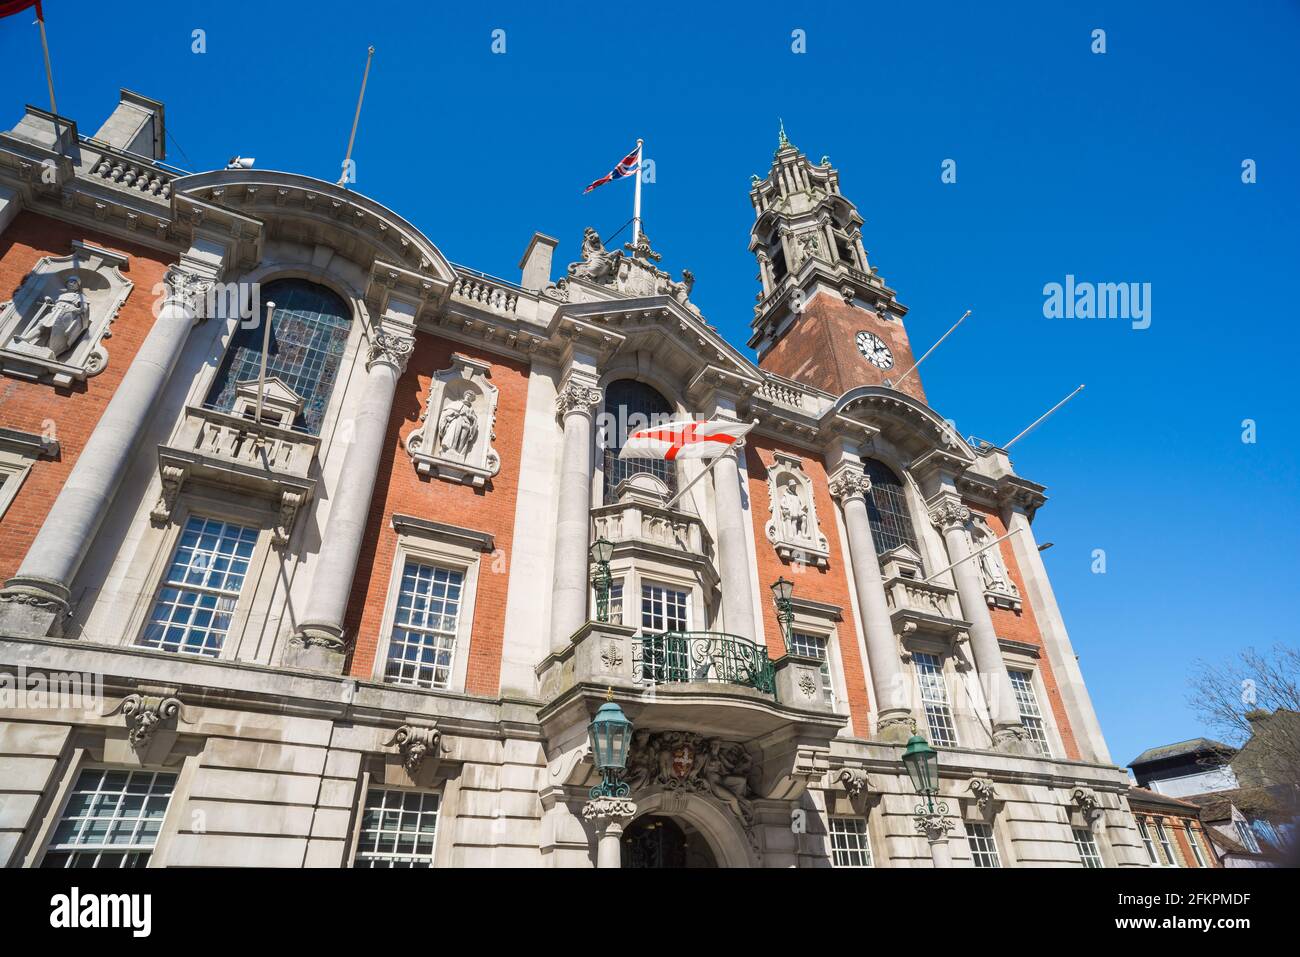 Colchester Town Hall, view of the baroque styled victorian Town Hall building (1897) and clock tower in Colchester High Street, Essex, England, UK Stock Photo